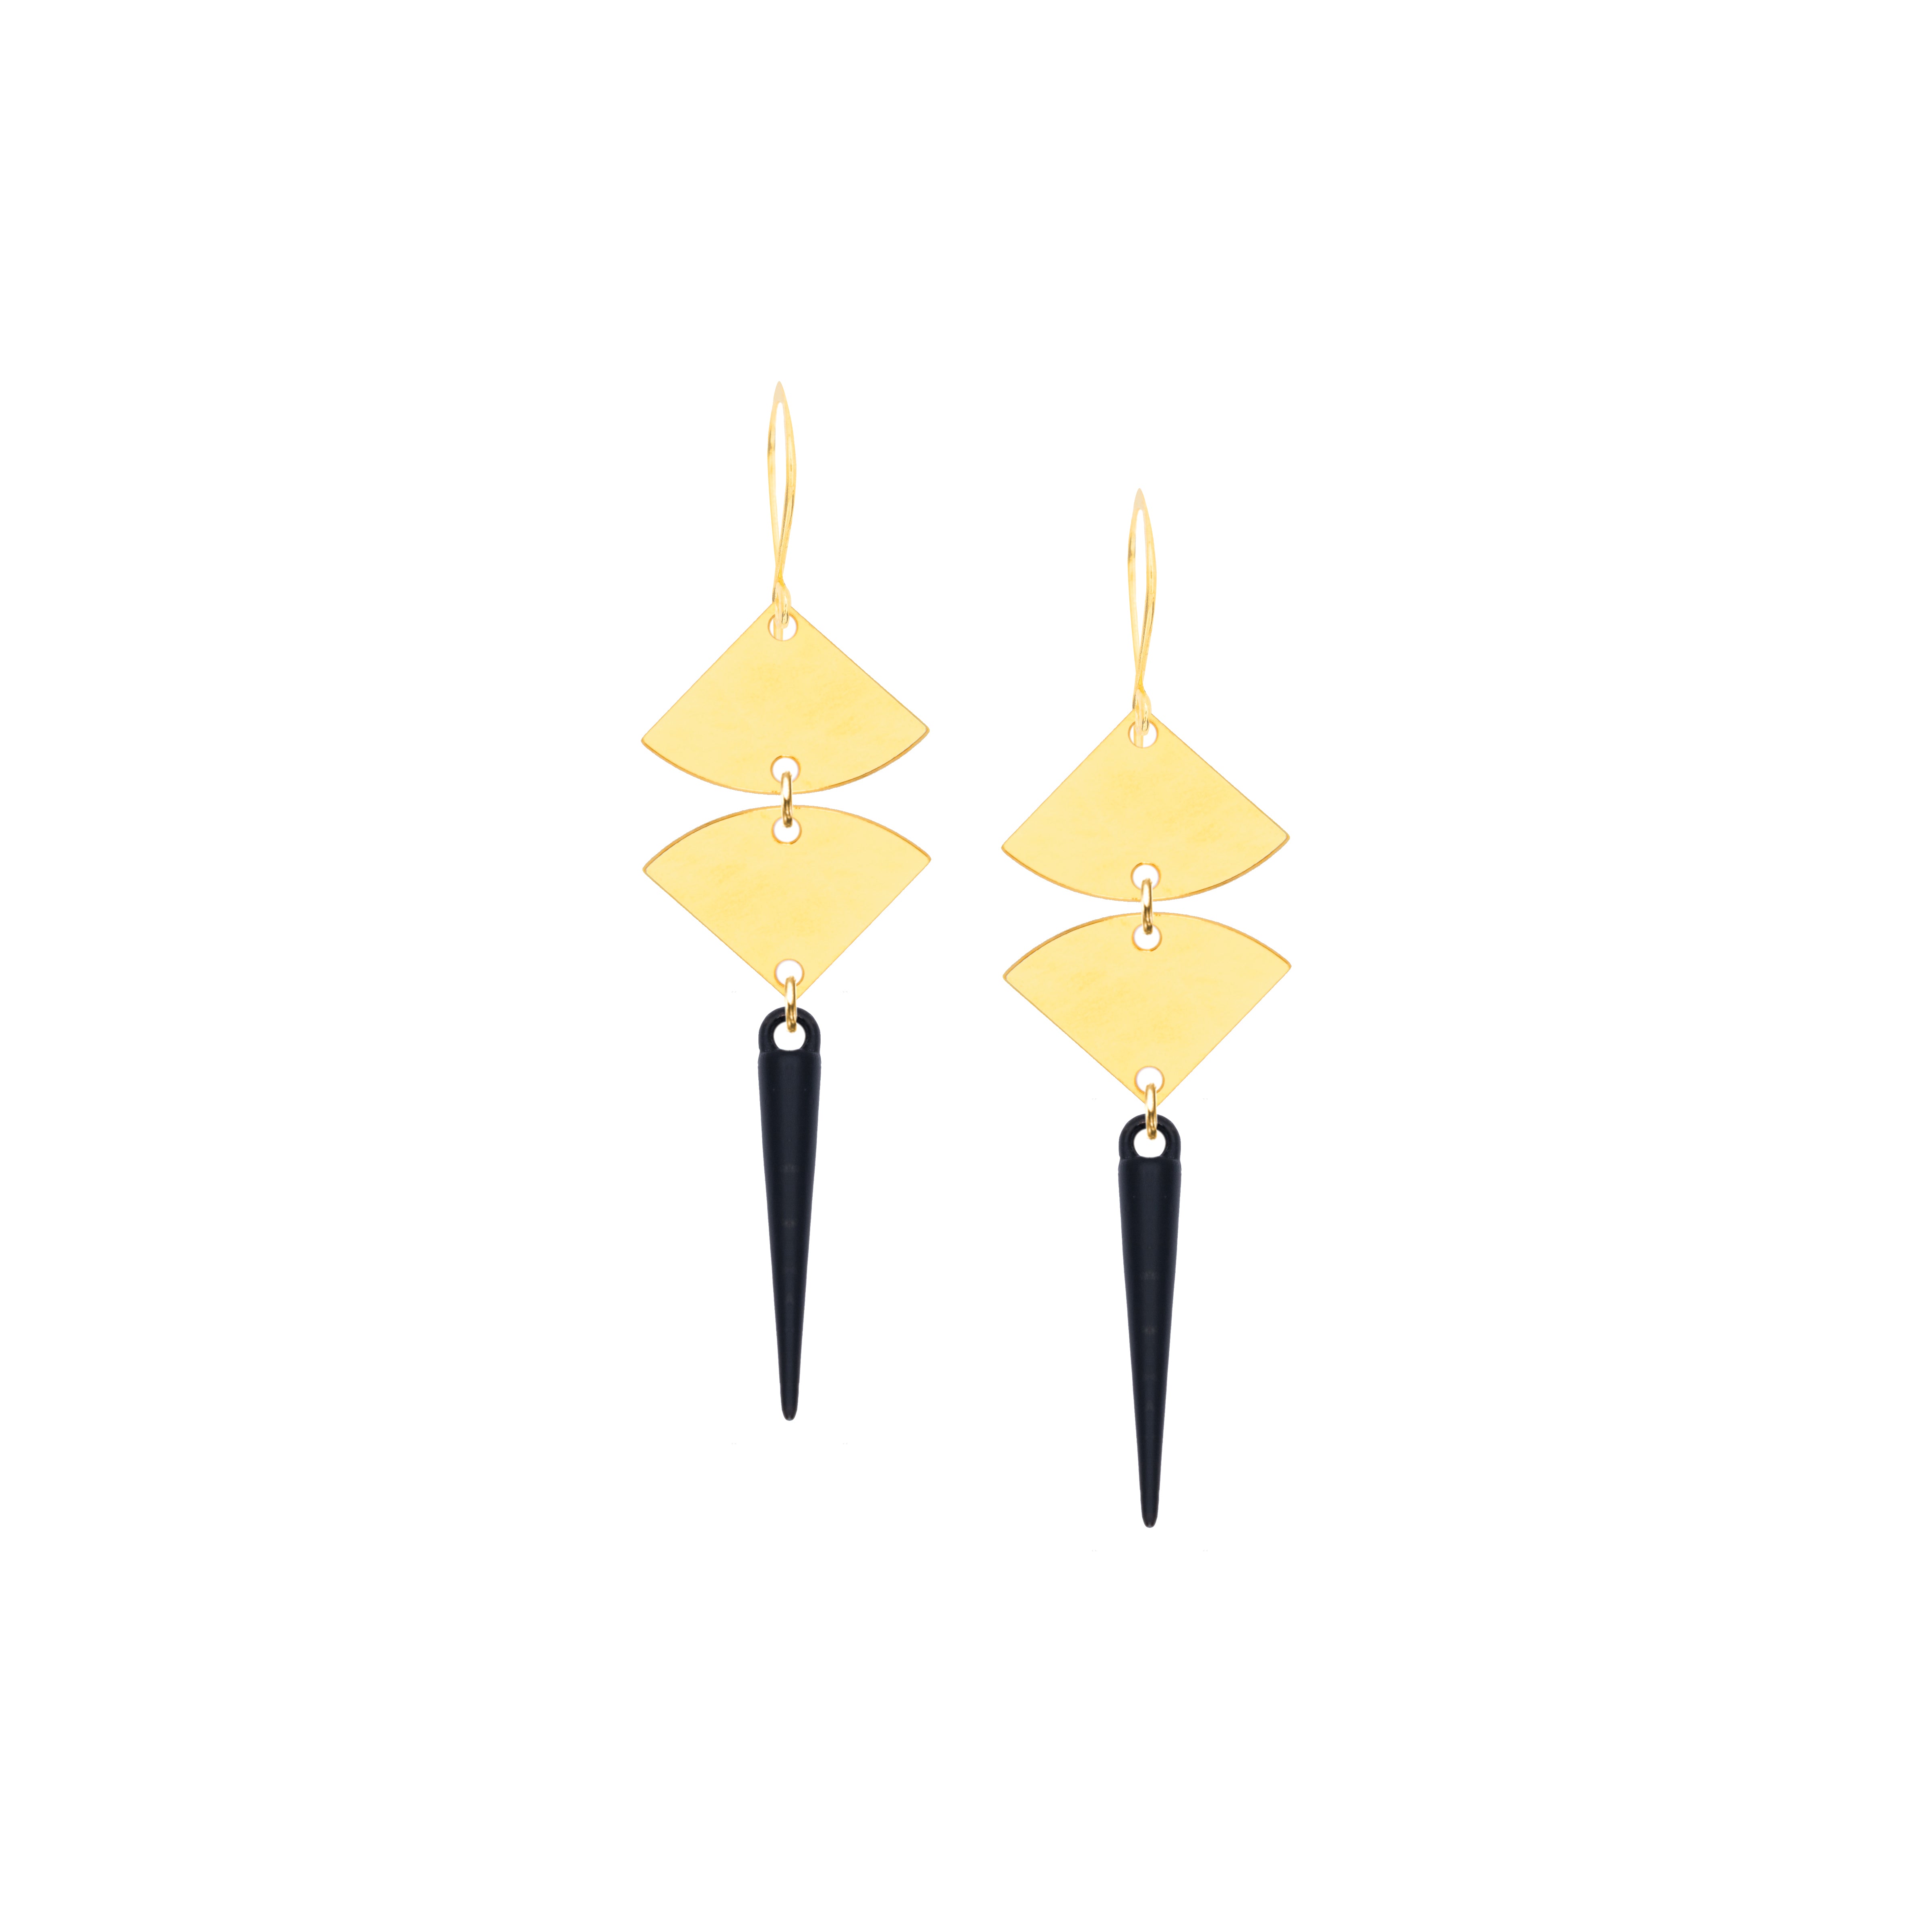 Silver earrings with black spikes | rebel jewelry